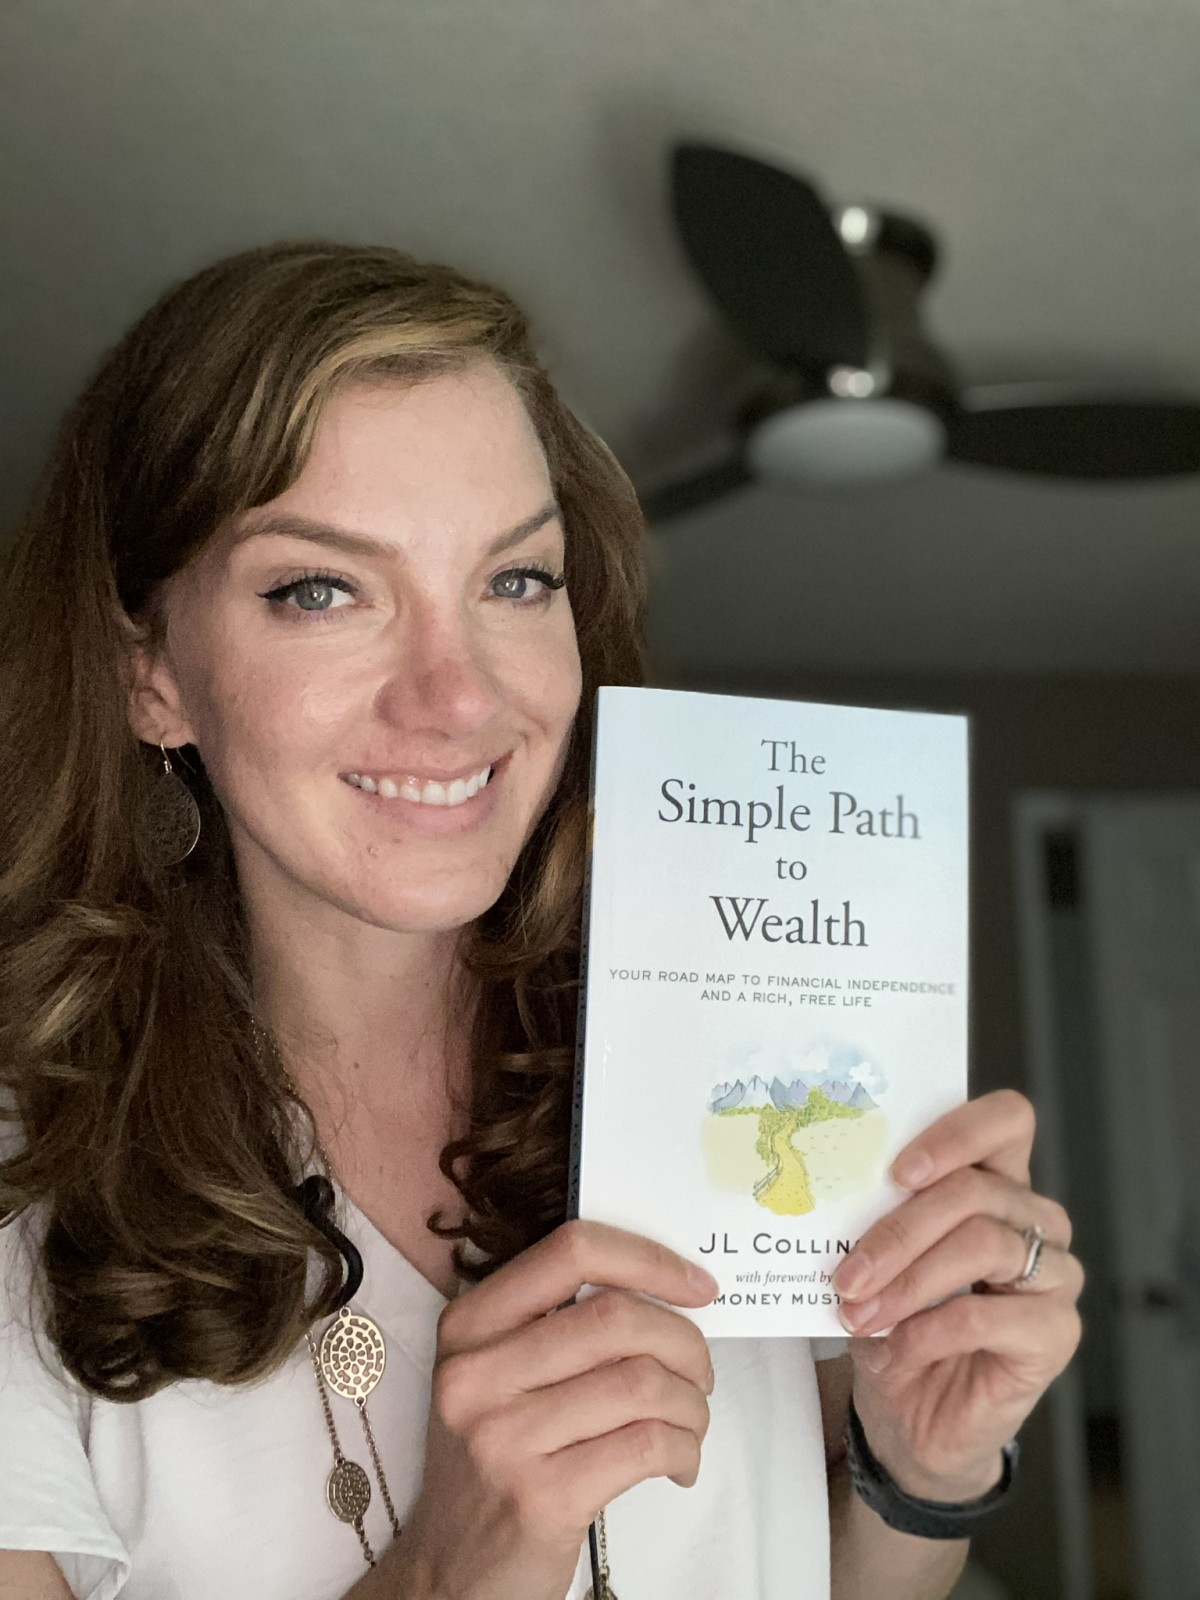 The Simple Path to Wealth by JL Collins